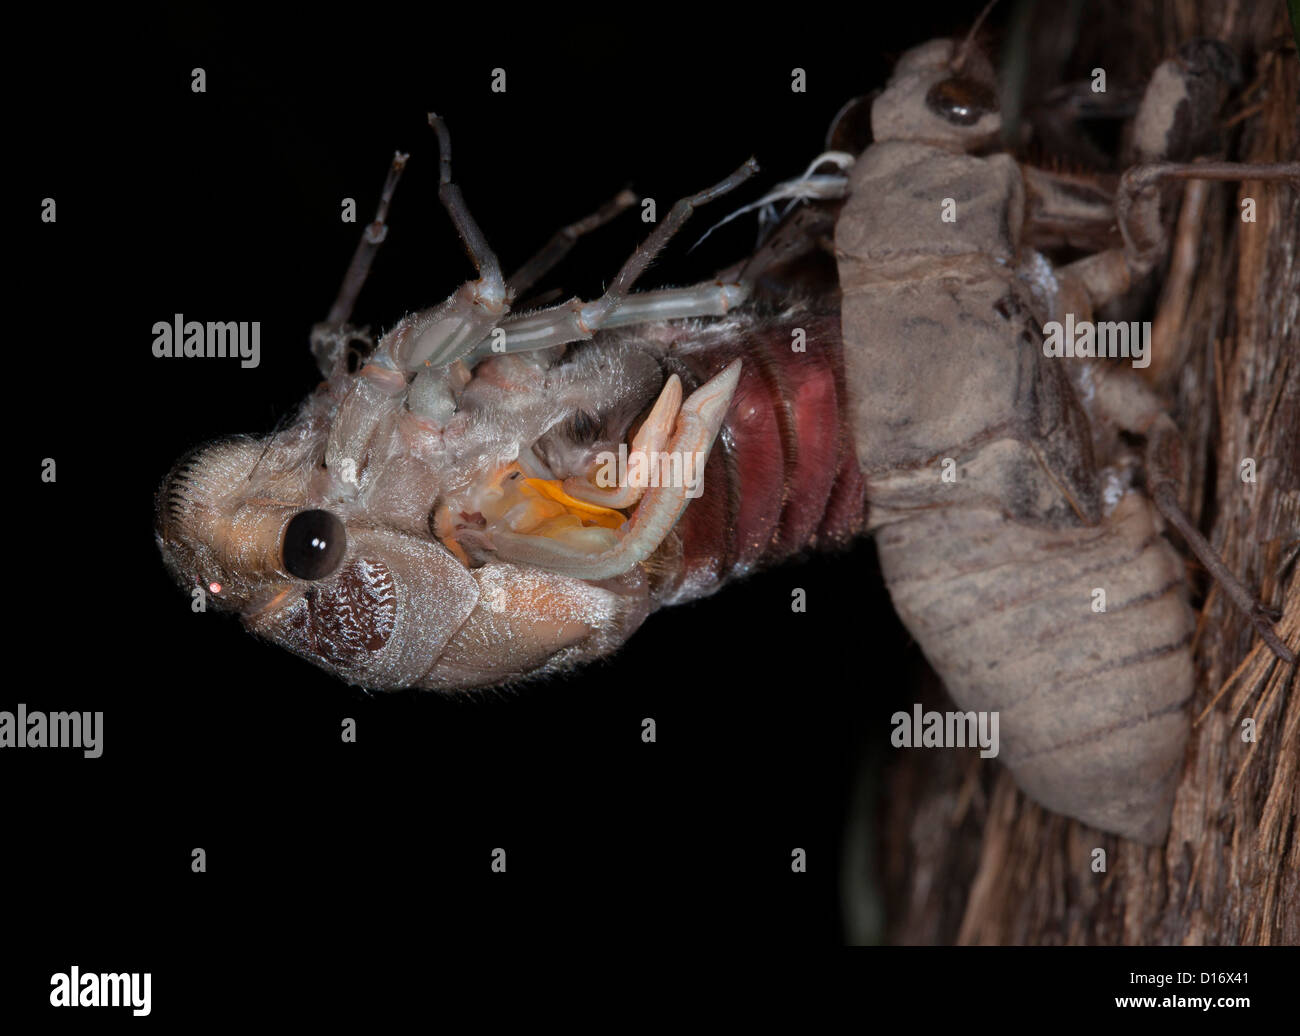 Australian Cicada - Thopa saccata - emerging from its beetle shell on the trunk of a gum tree during metamorphosis Stock Photo